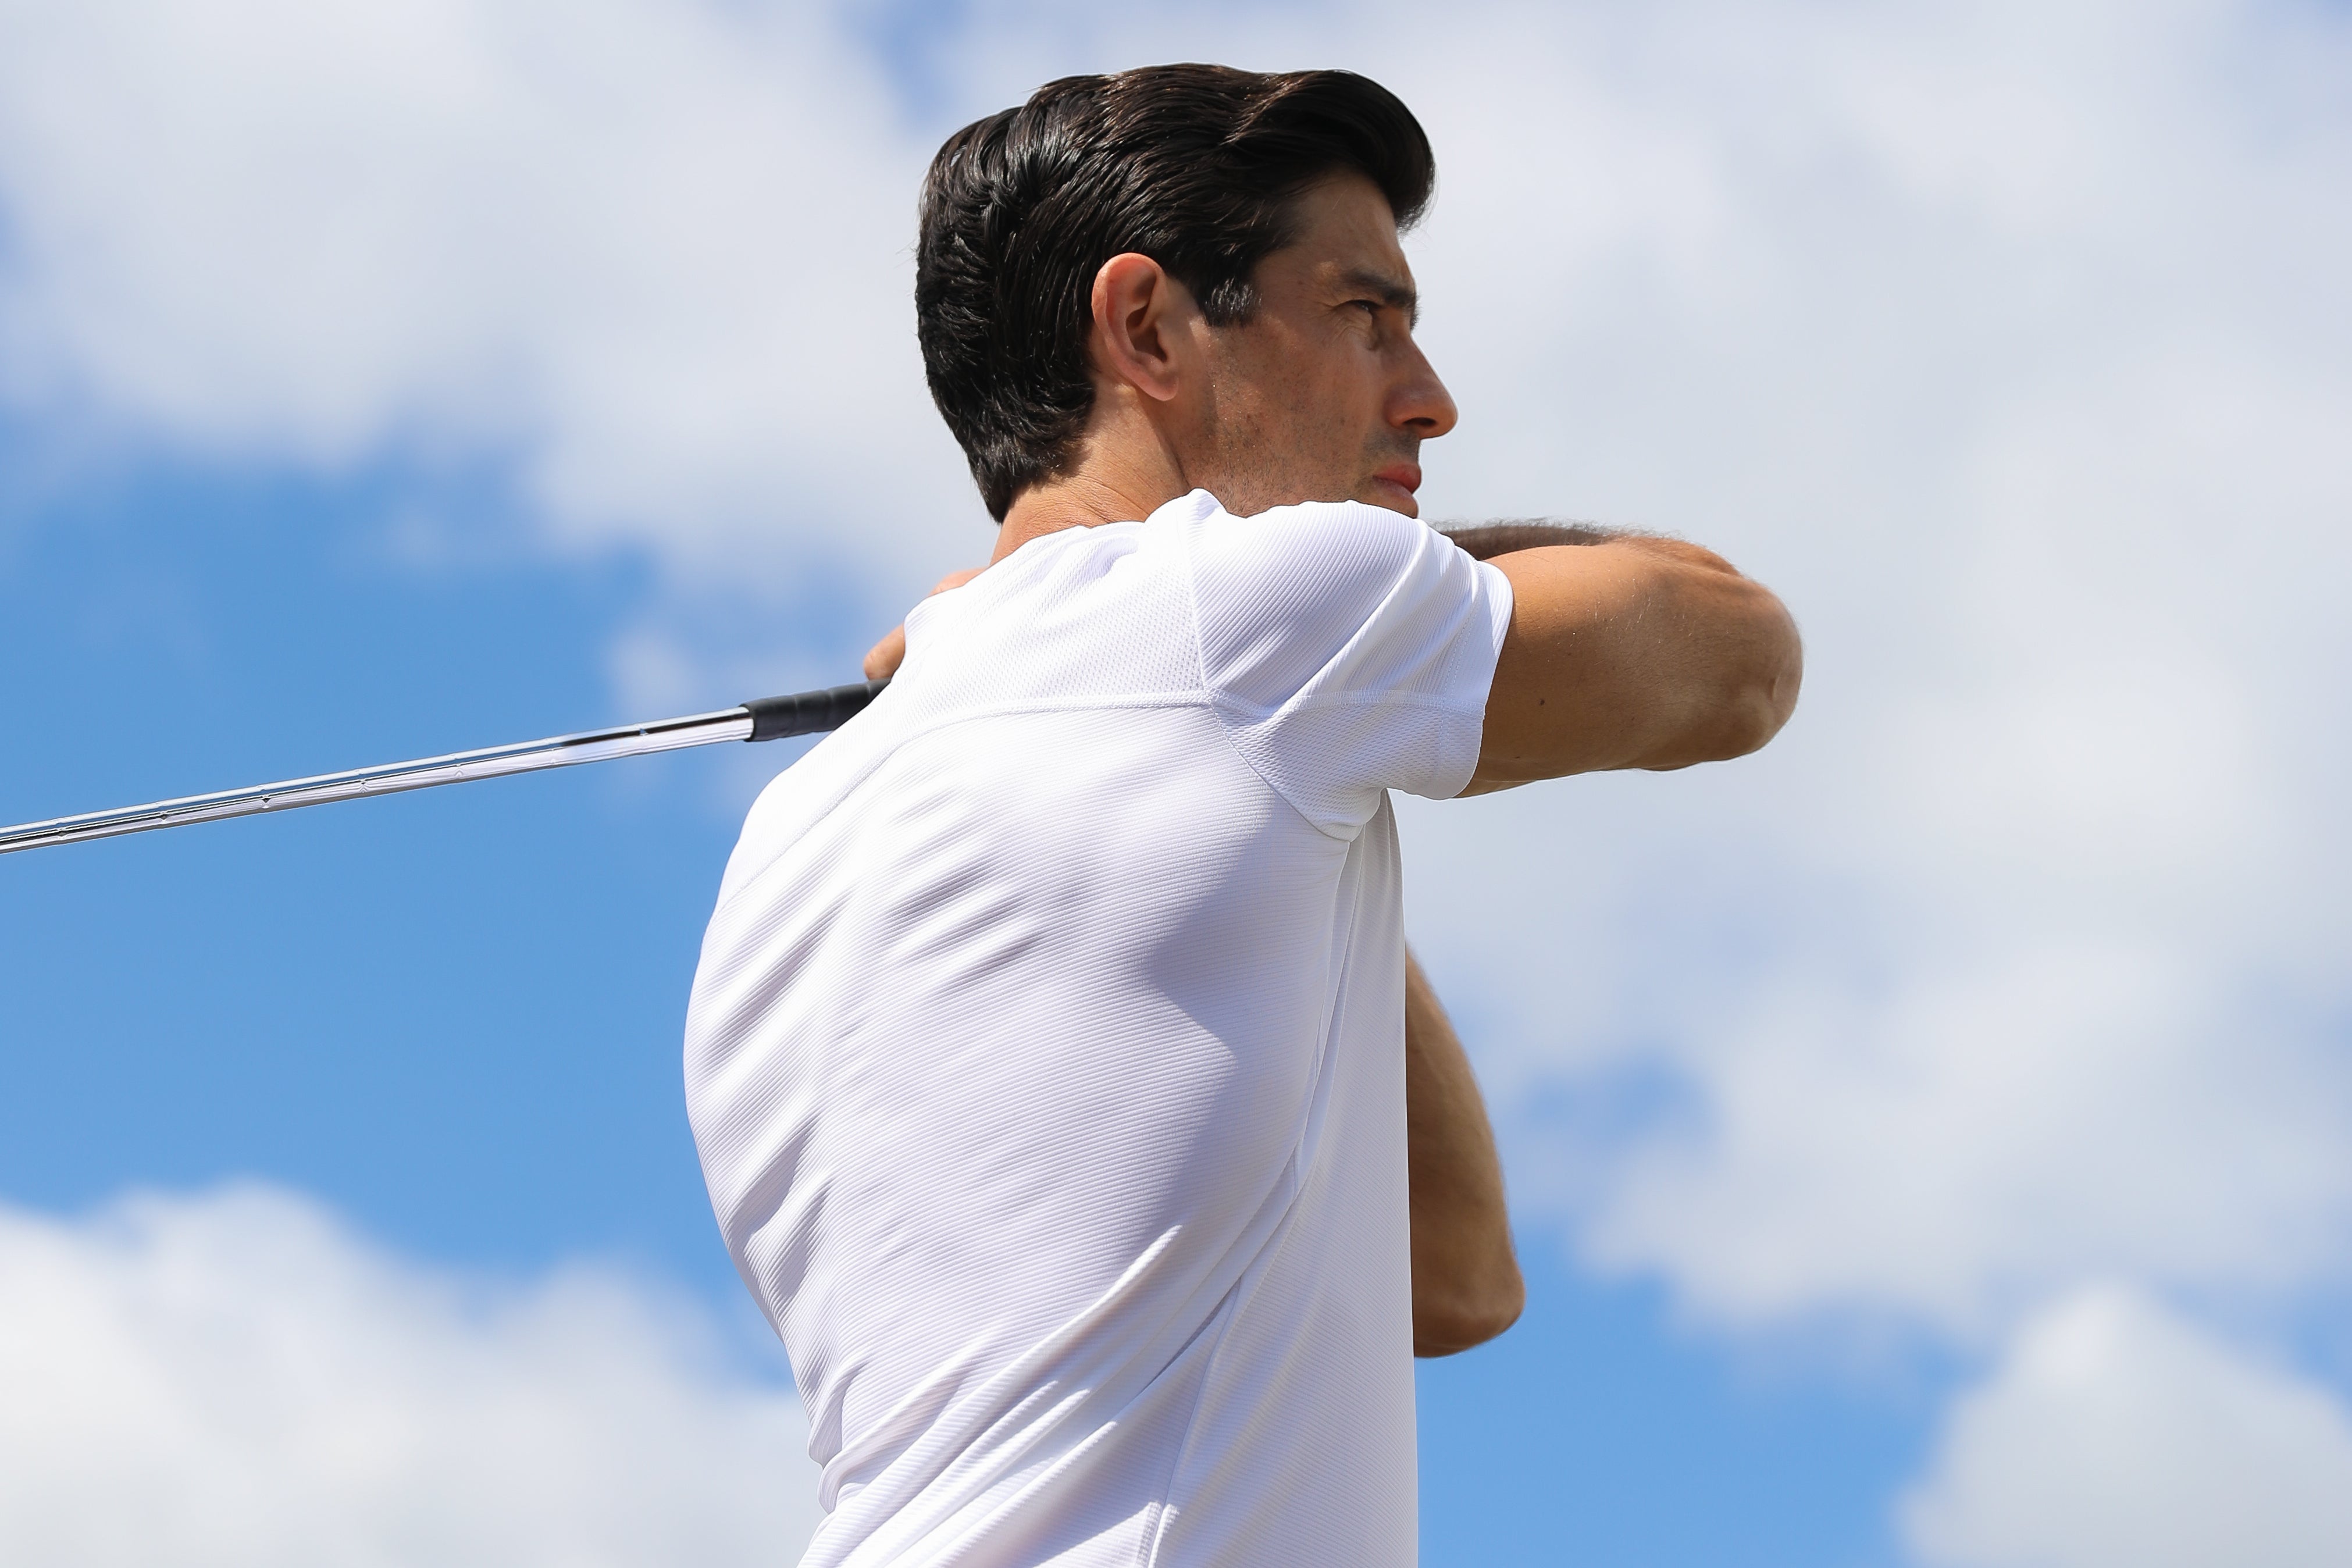 Man in Truwear white short-sleeved golf shirt in the middle of a golf swing